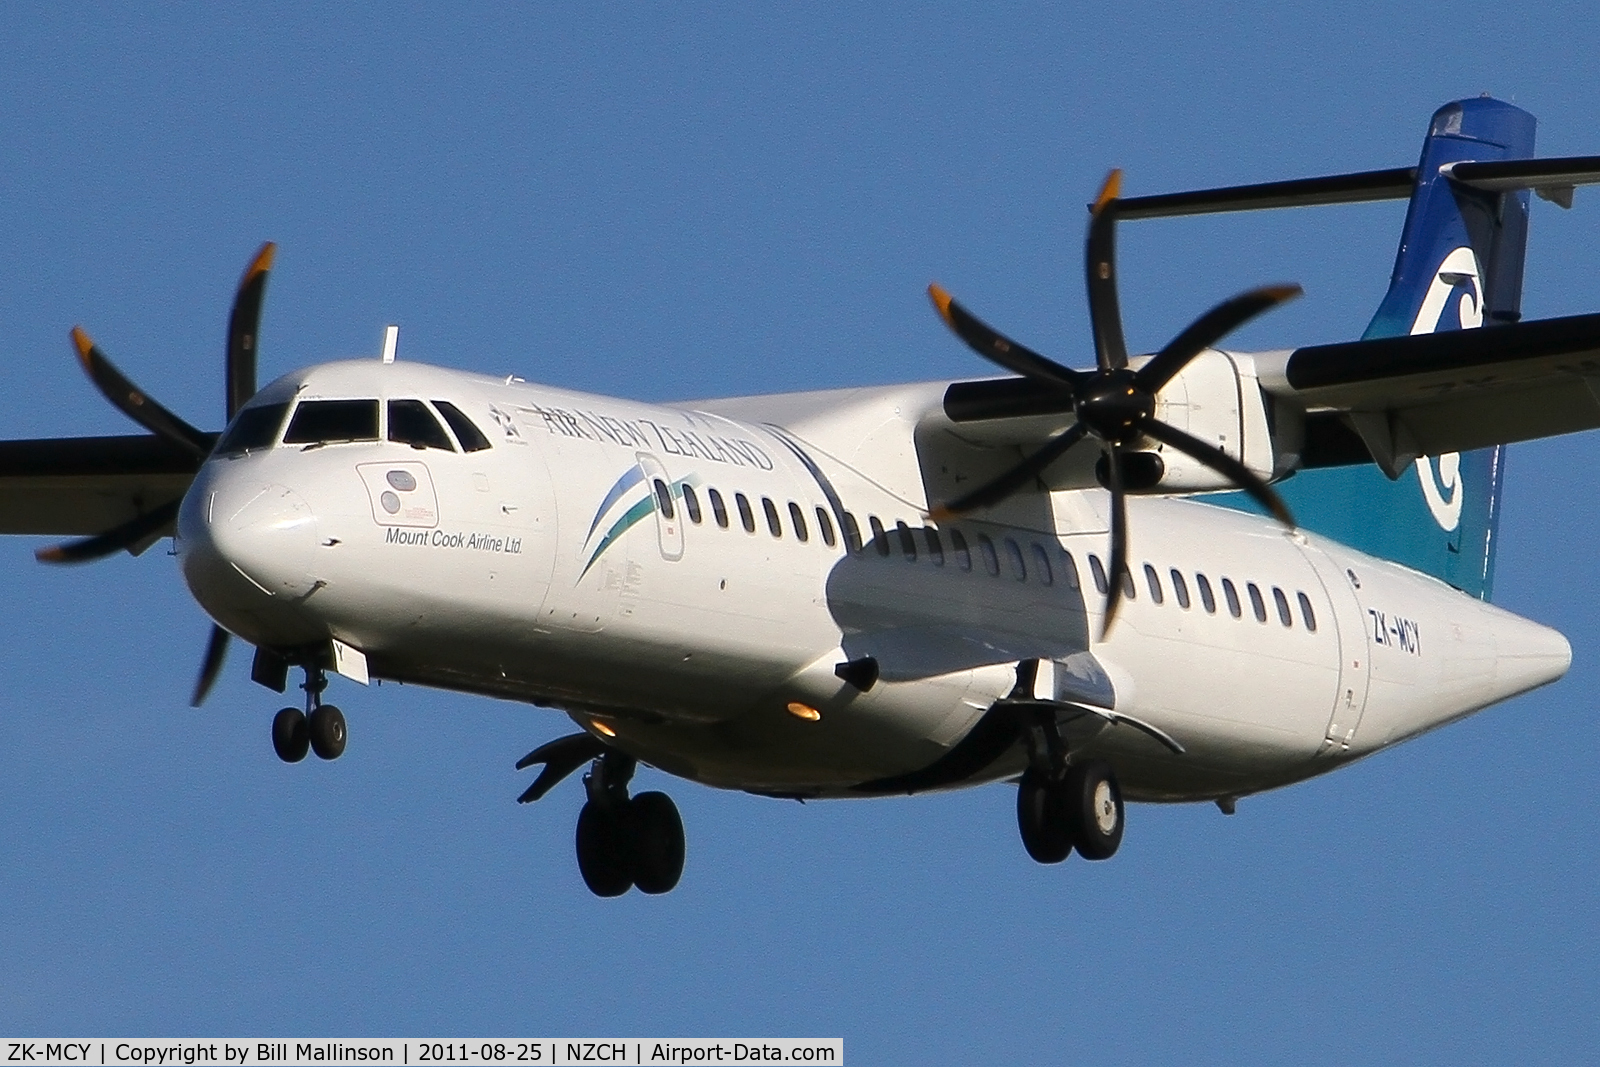 ZK-MCY, 2003 ATR 72-212A C/N 703, finals to 02